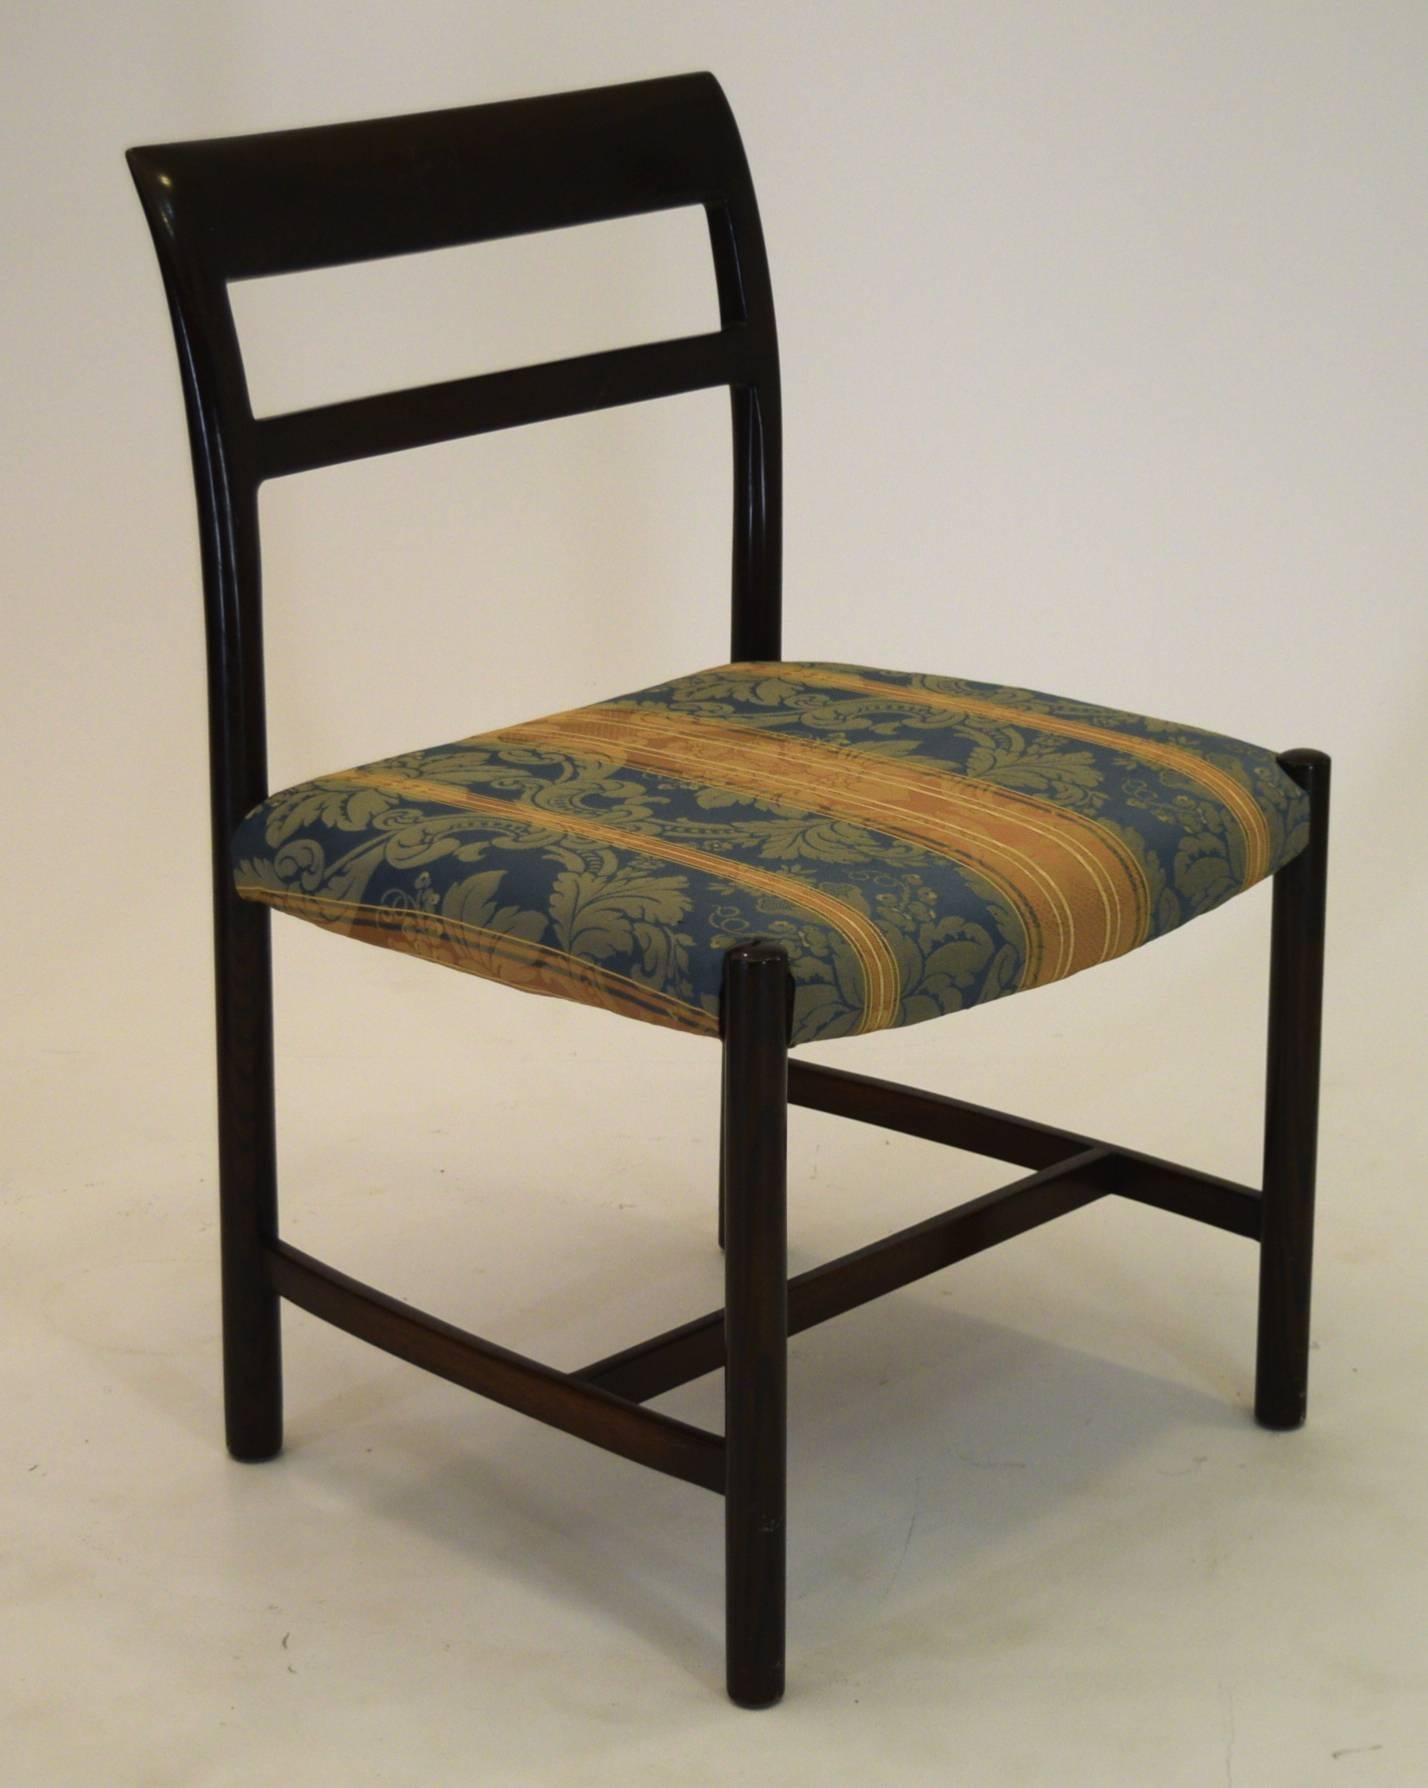 Dining chairs, Dunbar 1967
Stained ash.
Measures 34